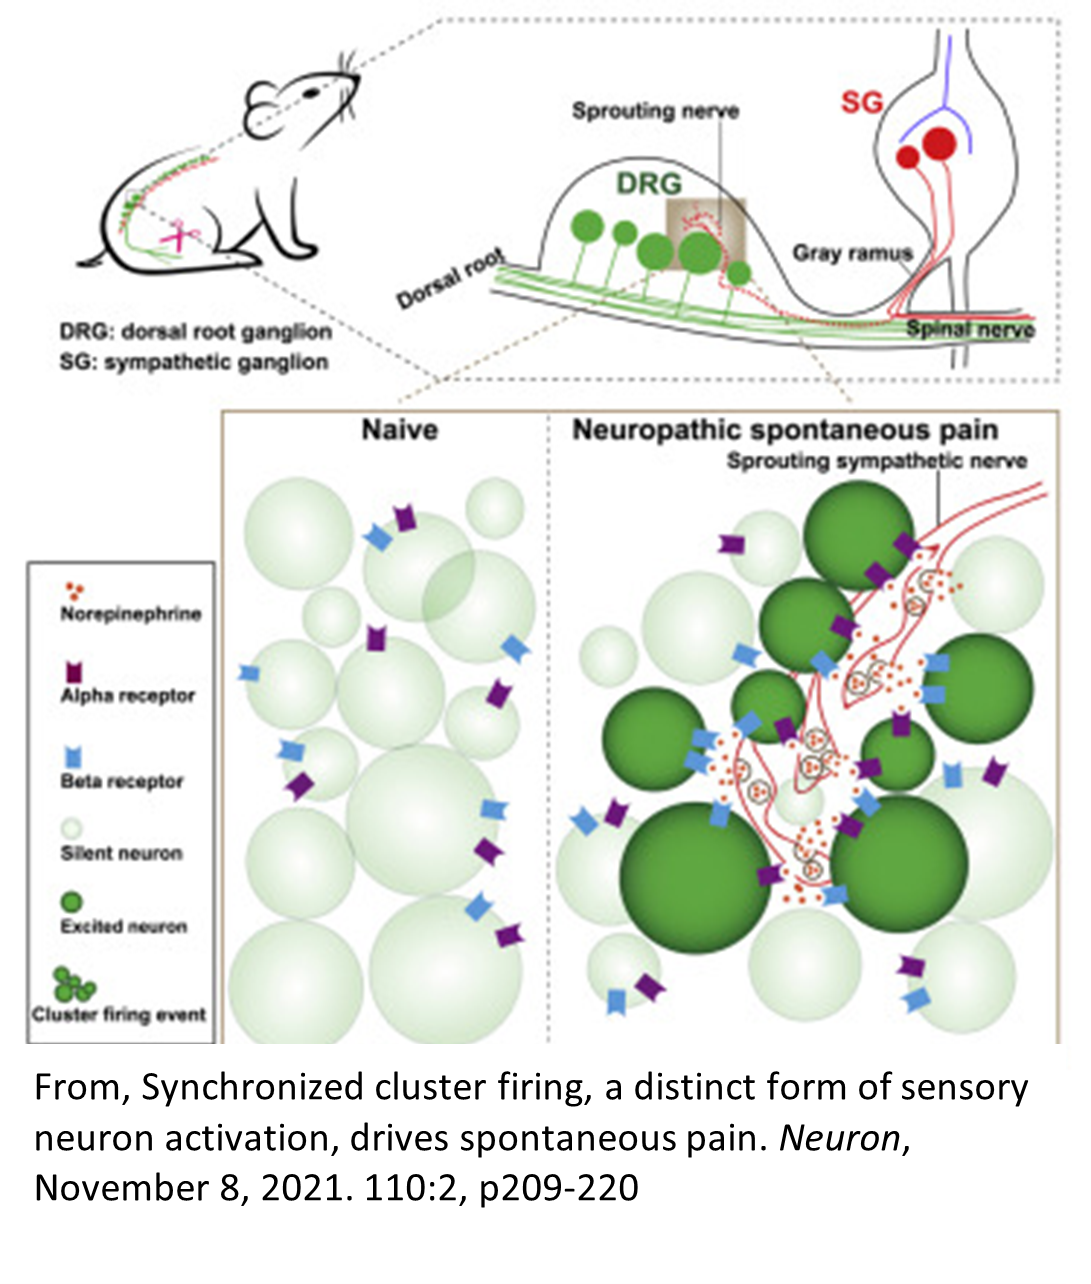 Synchronized cluster firing, a distinct form of sensory neuron activation, drives spontaneous pain.